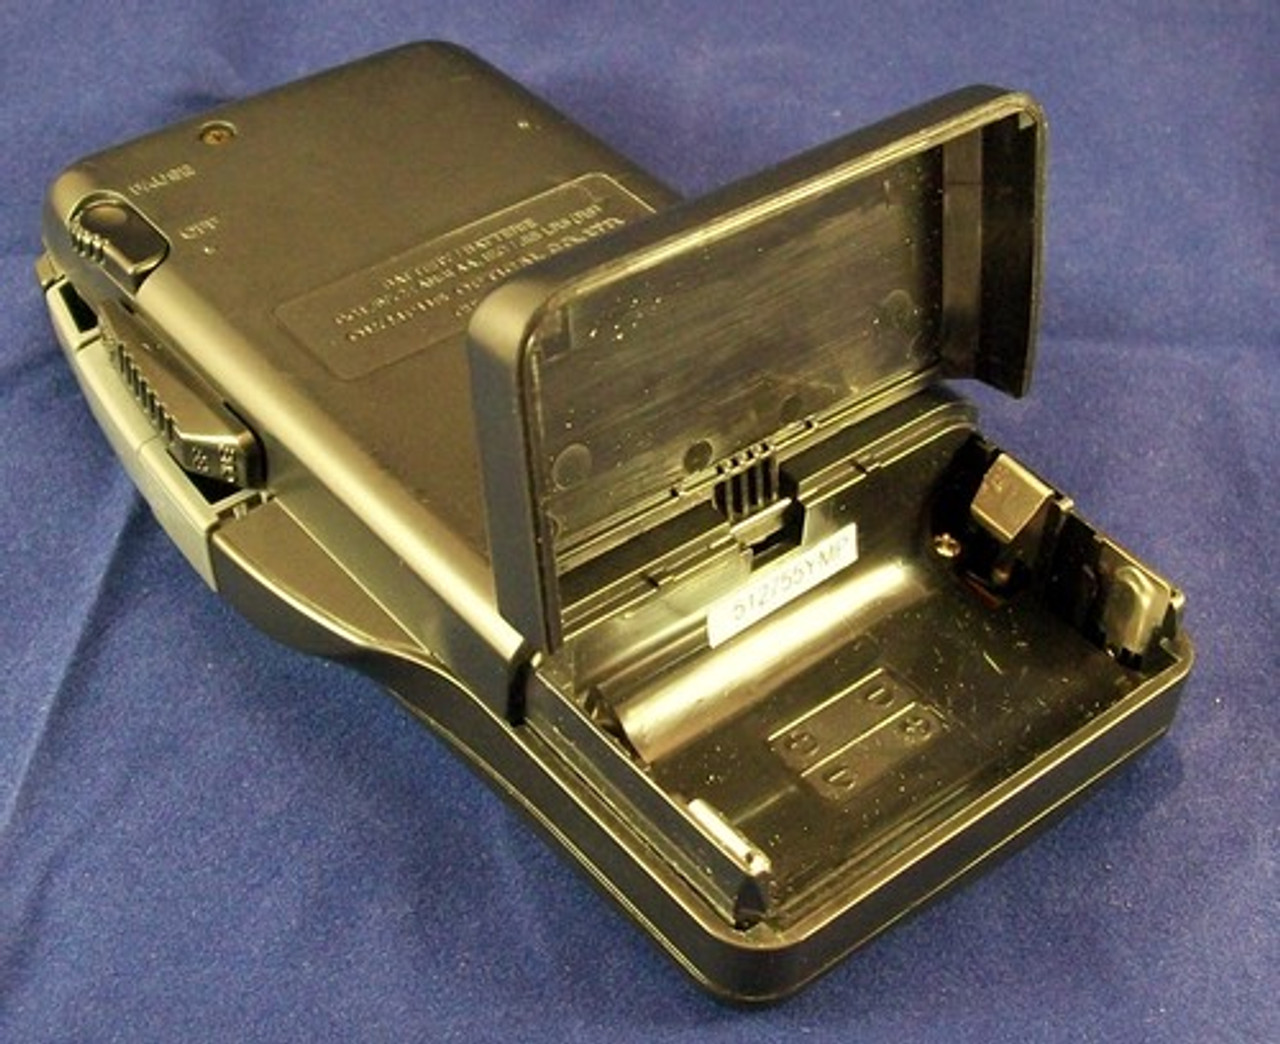 Olympus Pearlcorder S-701 Handheld Micro Cassette Voice Recorder battery compartment